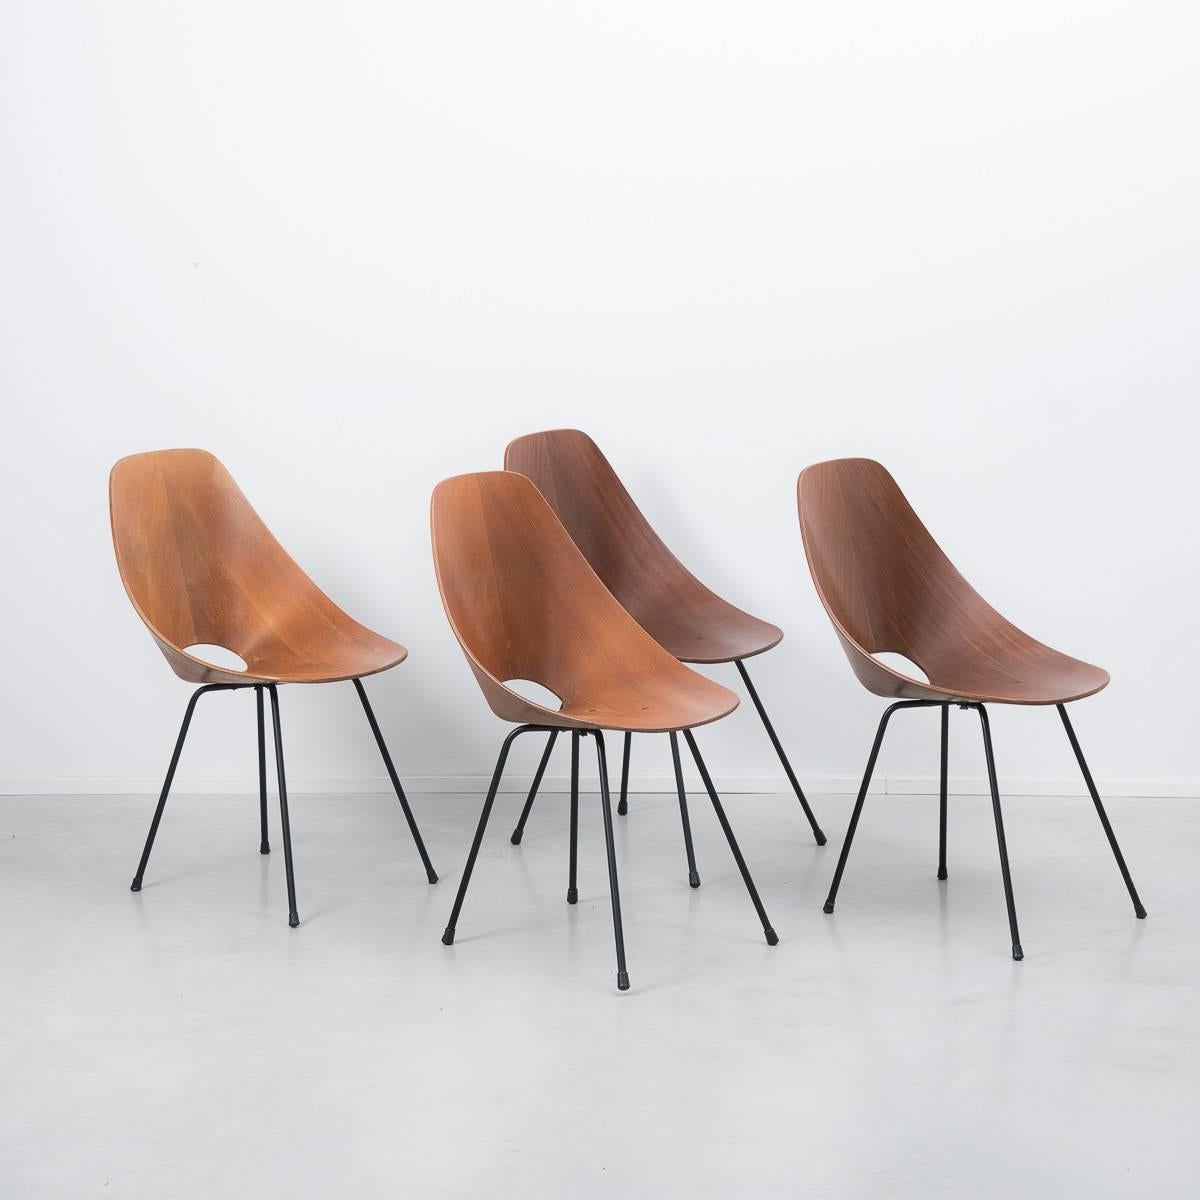 Italian molded plywood ‘Medea’ chairs designed by Vittorio Nobili for Fratelli Tagliabue in 1955. Molded teak wood seats are supported by black enamelled steel legs, accented with brass hardware. A perfect representation of the organic modern style.